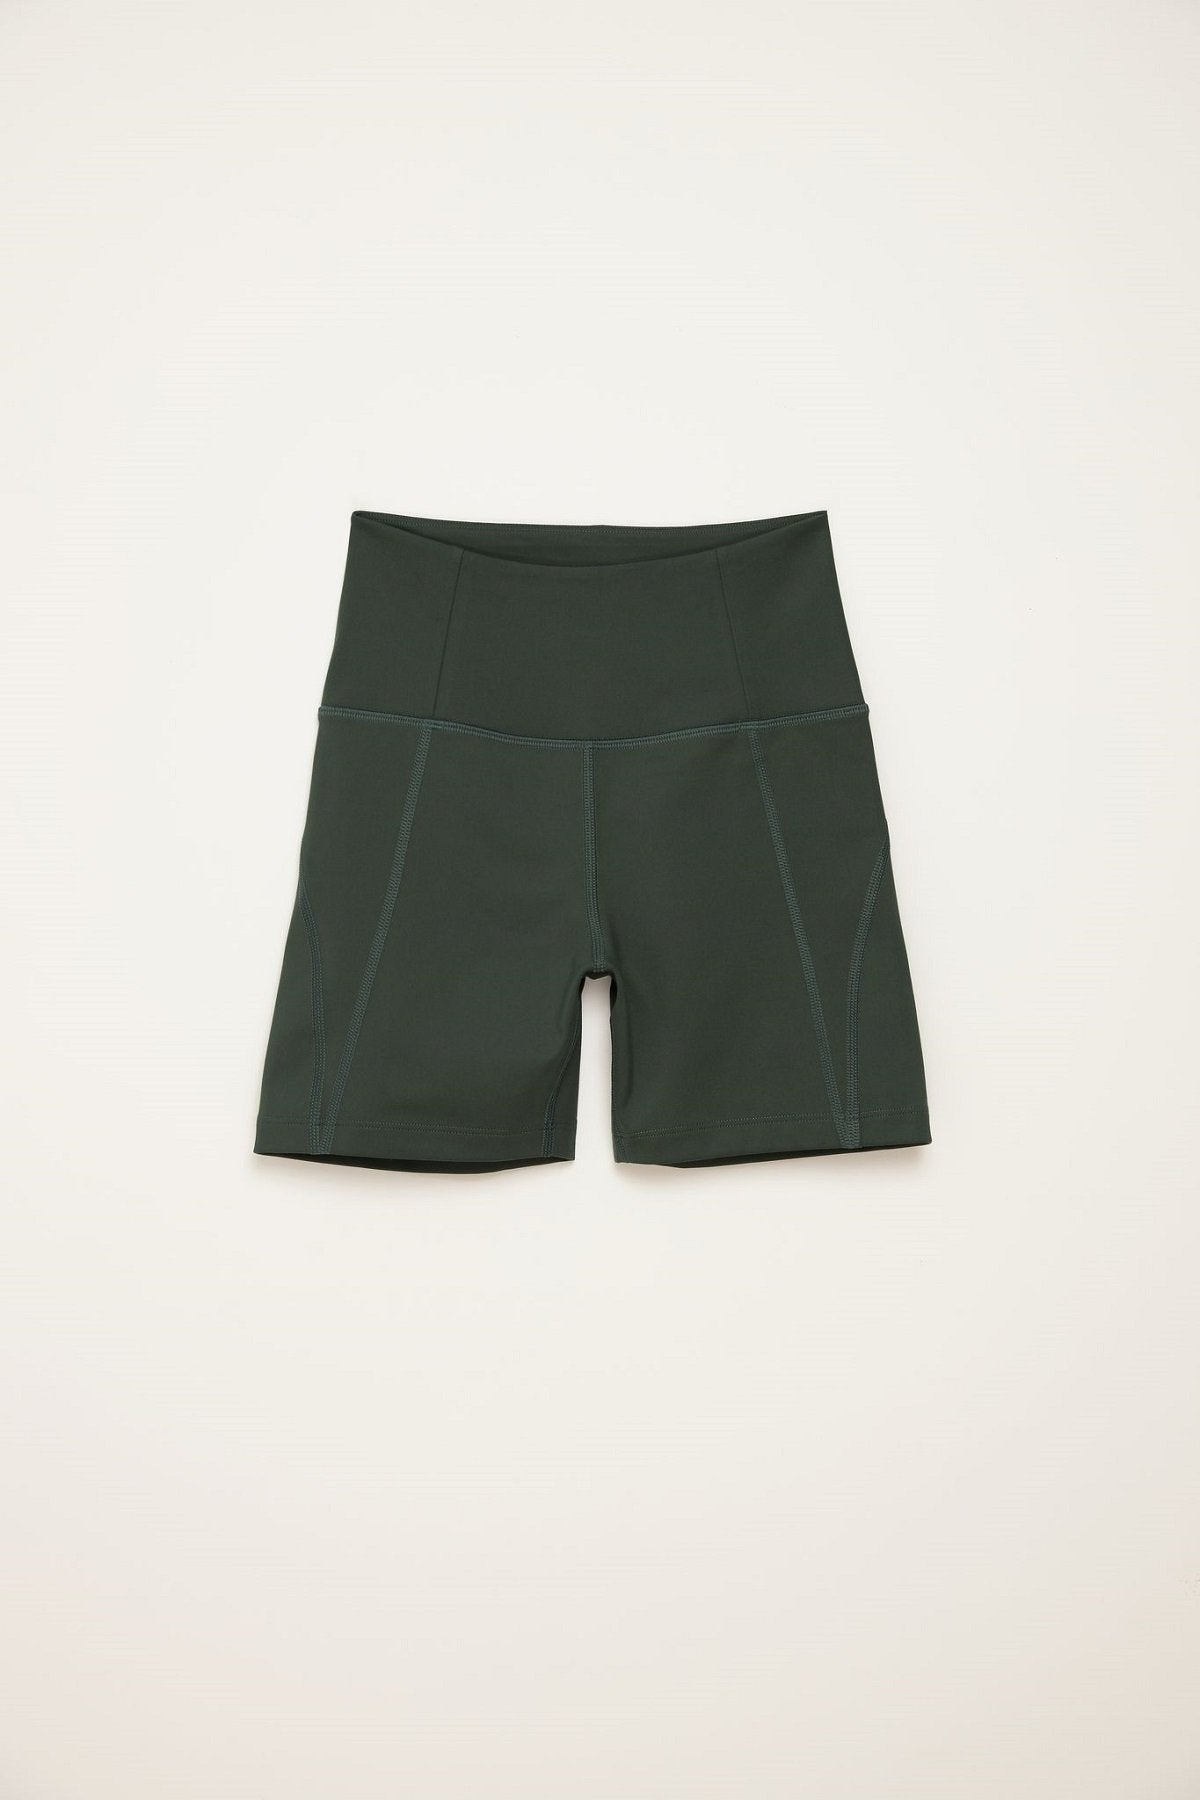 Girlfriend Collective Run Shorts High-Rise - Made from Recycled